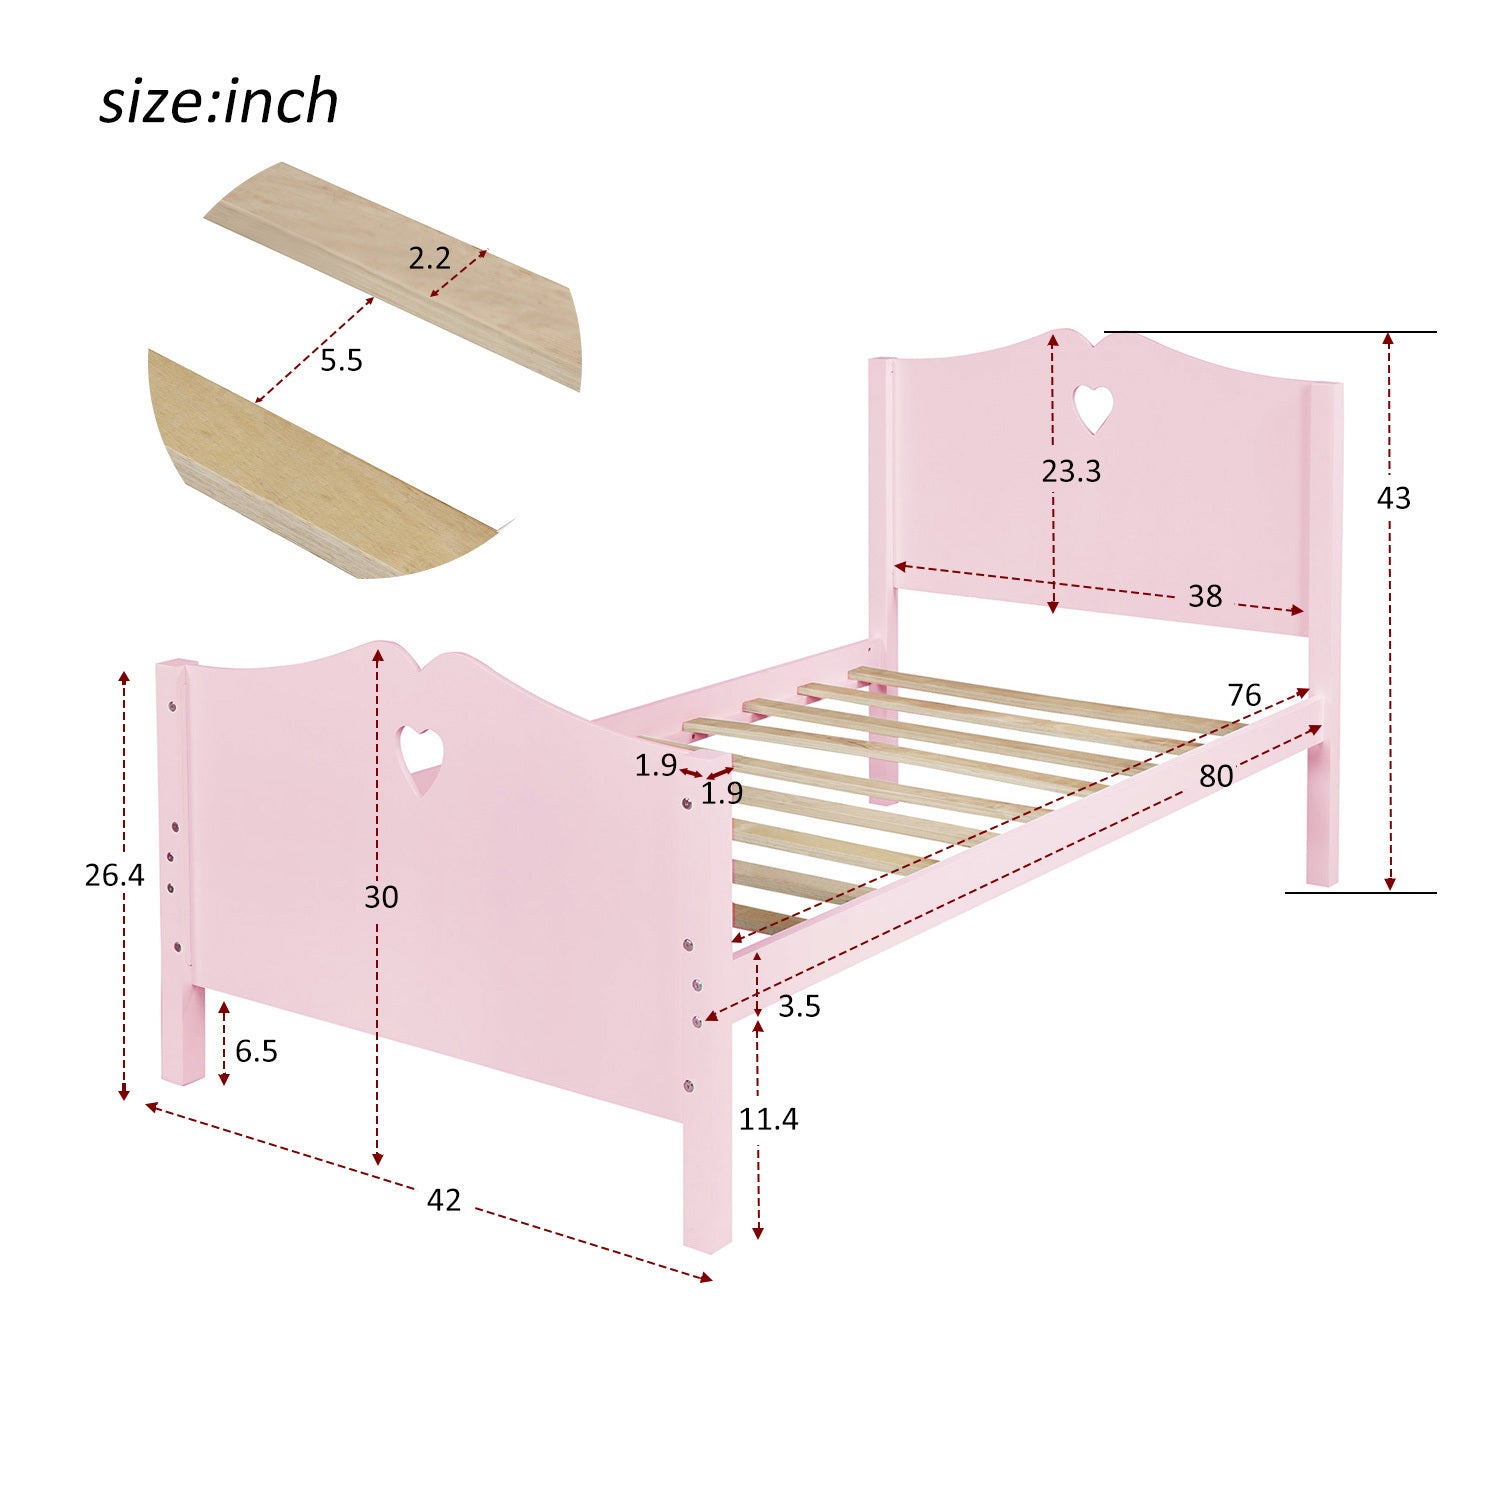 Twin Size Wood Platform Bed with Headboard,Footboard and Wood Slat Support Pink